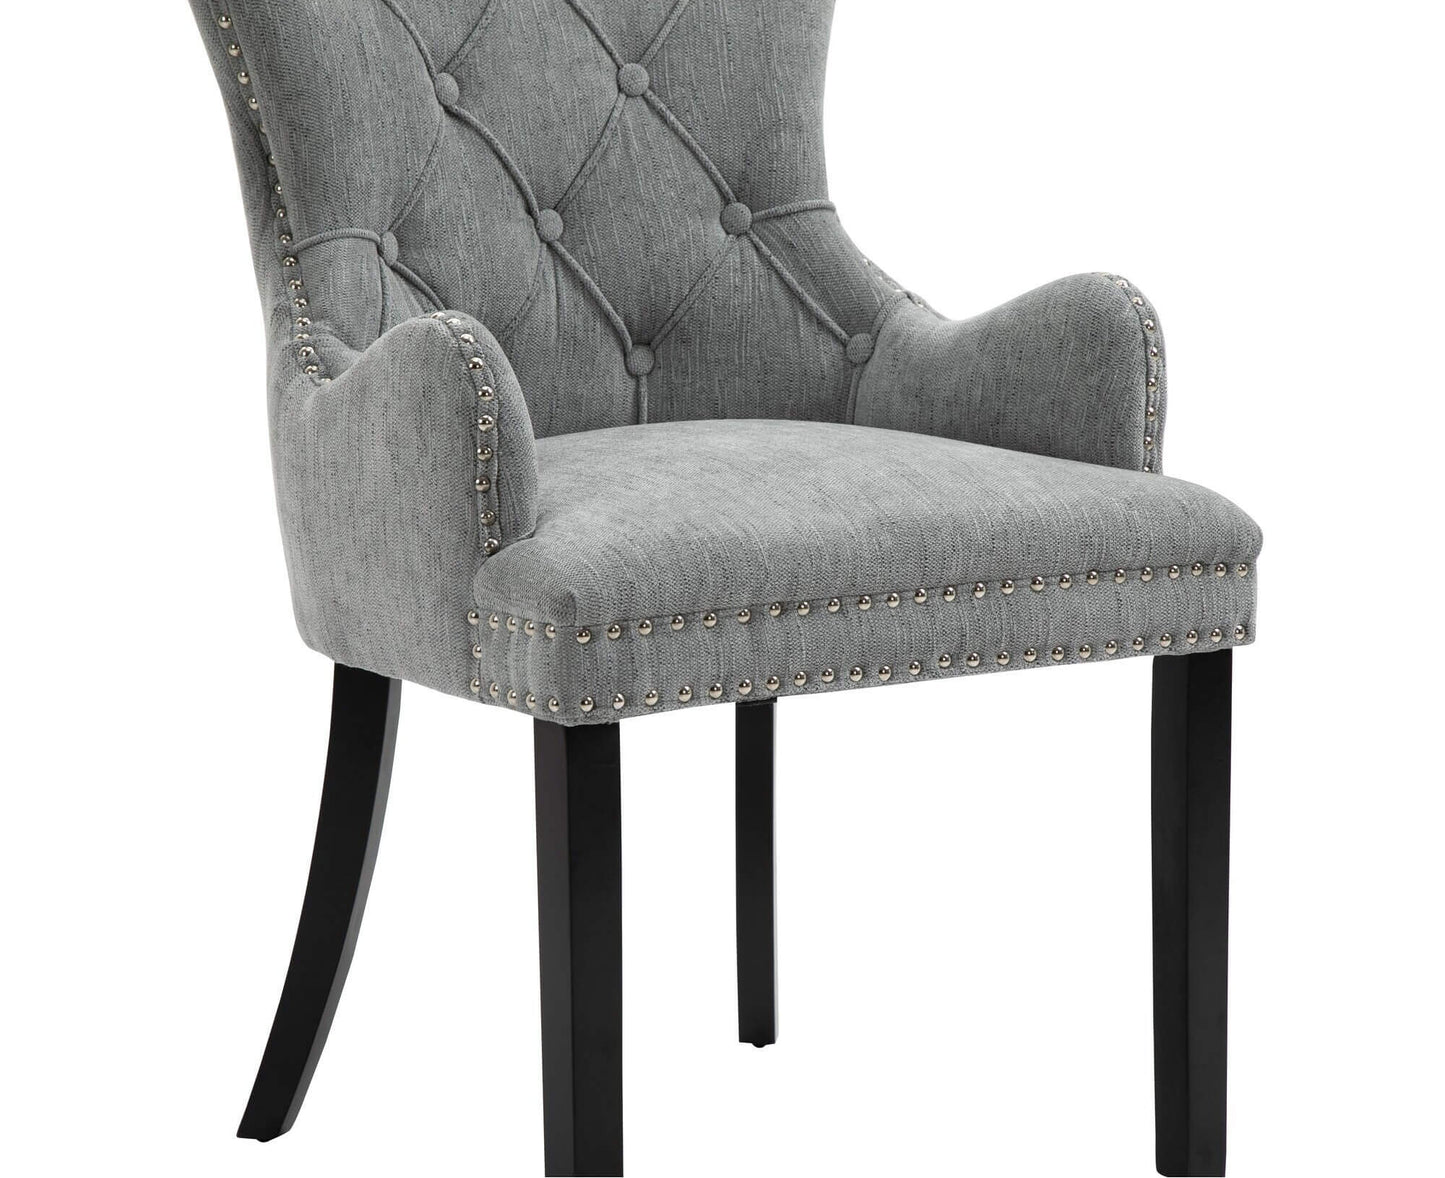 Genoa Version 1 | Fabric French Provincial Wooden Dining Chairs With Arms | Set Of 2 | Grey